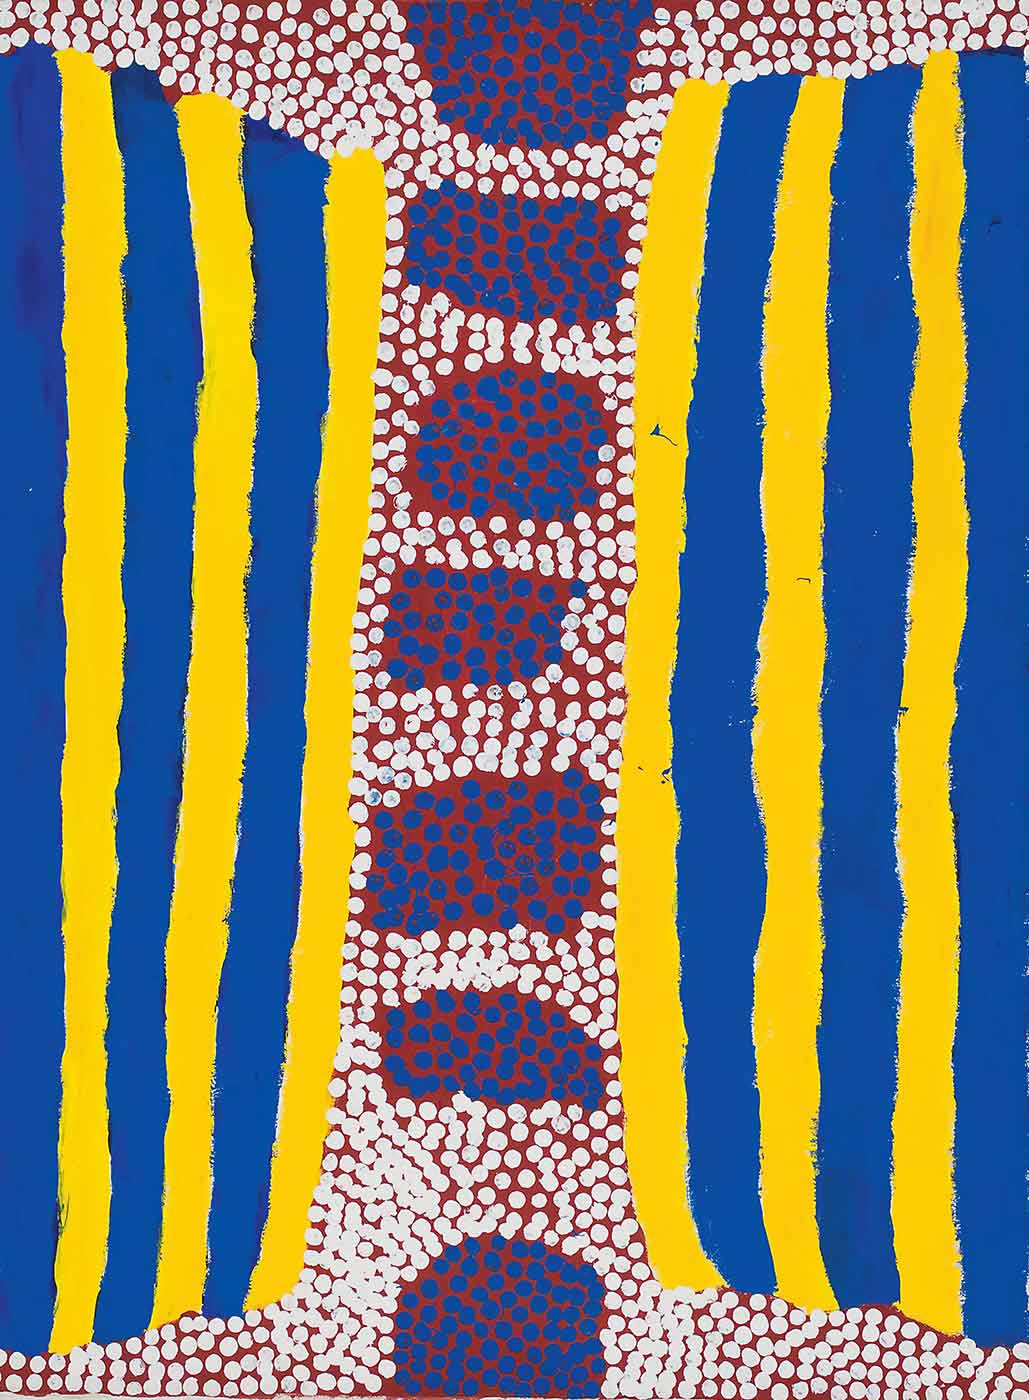 A painting on canvas with a vertical line of blue dotted rectangles on brown, flanked by vertical yellow and blue stripes. The background is brown covered with white dots. - click to view larger image